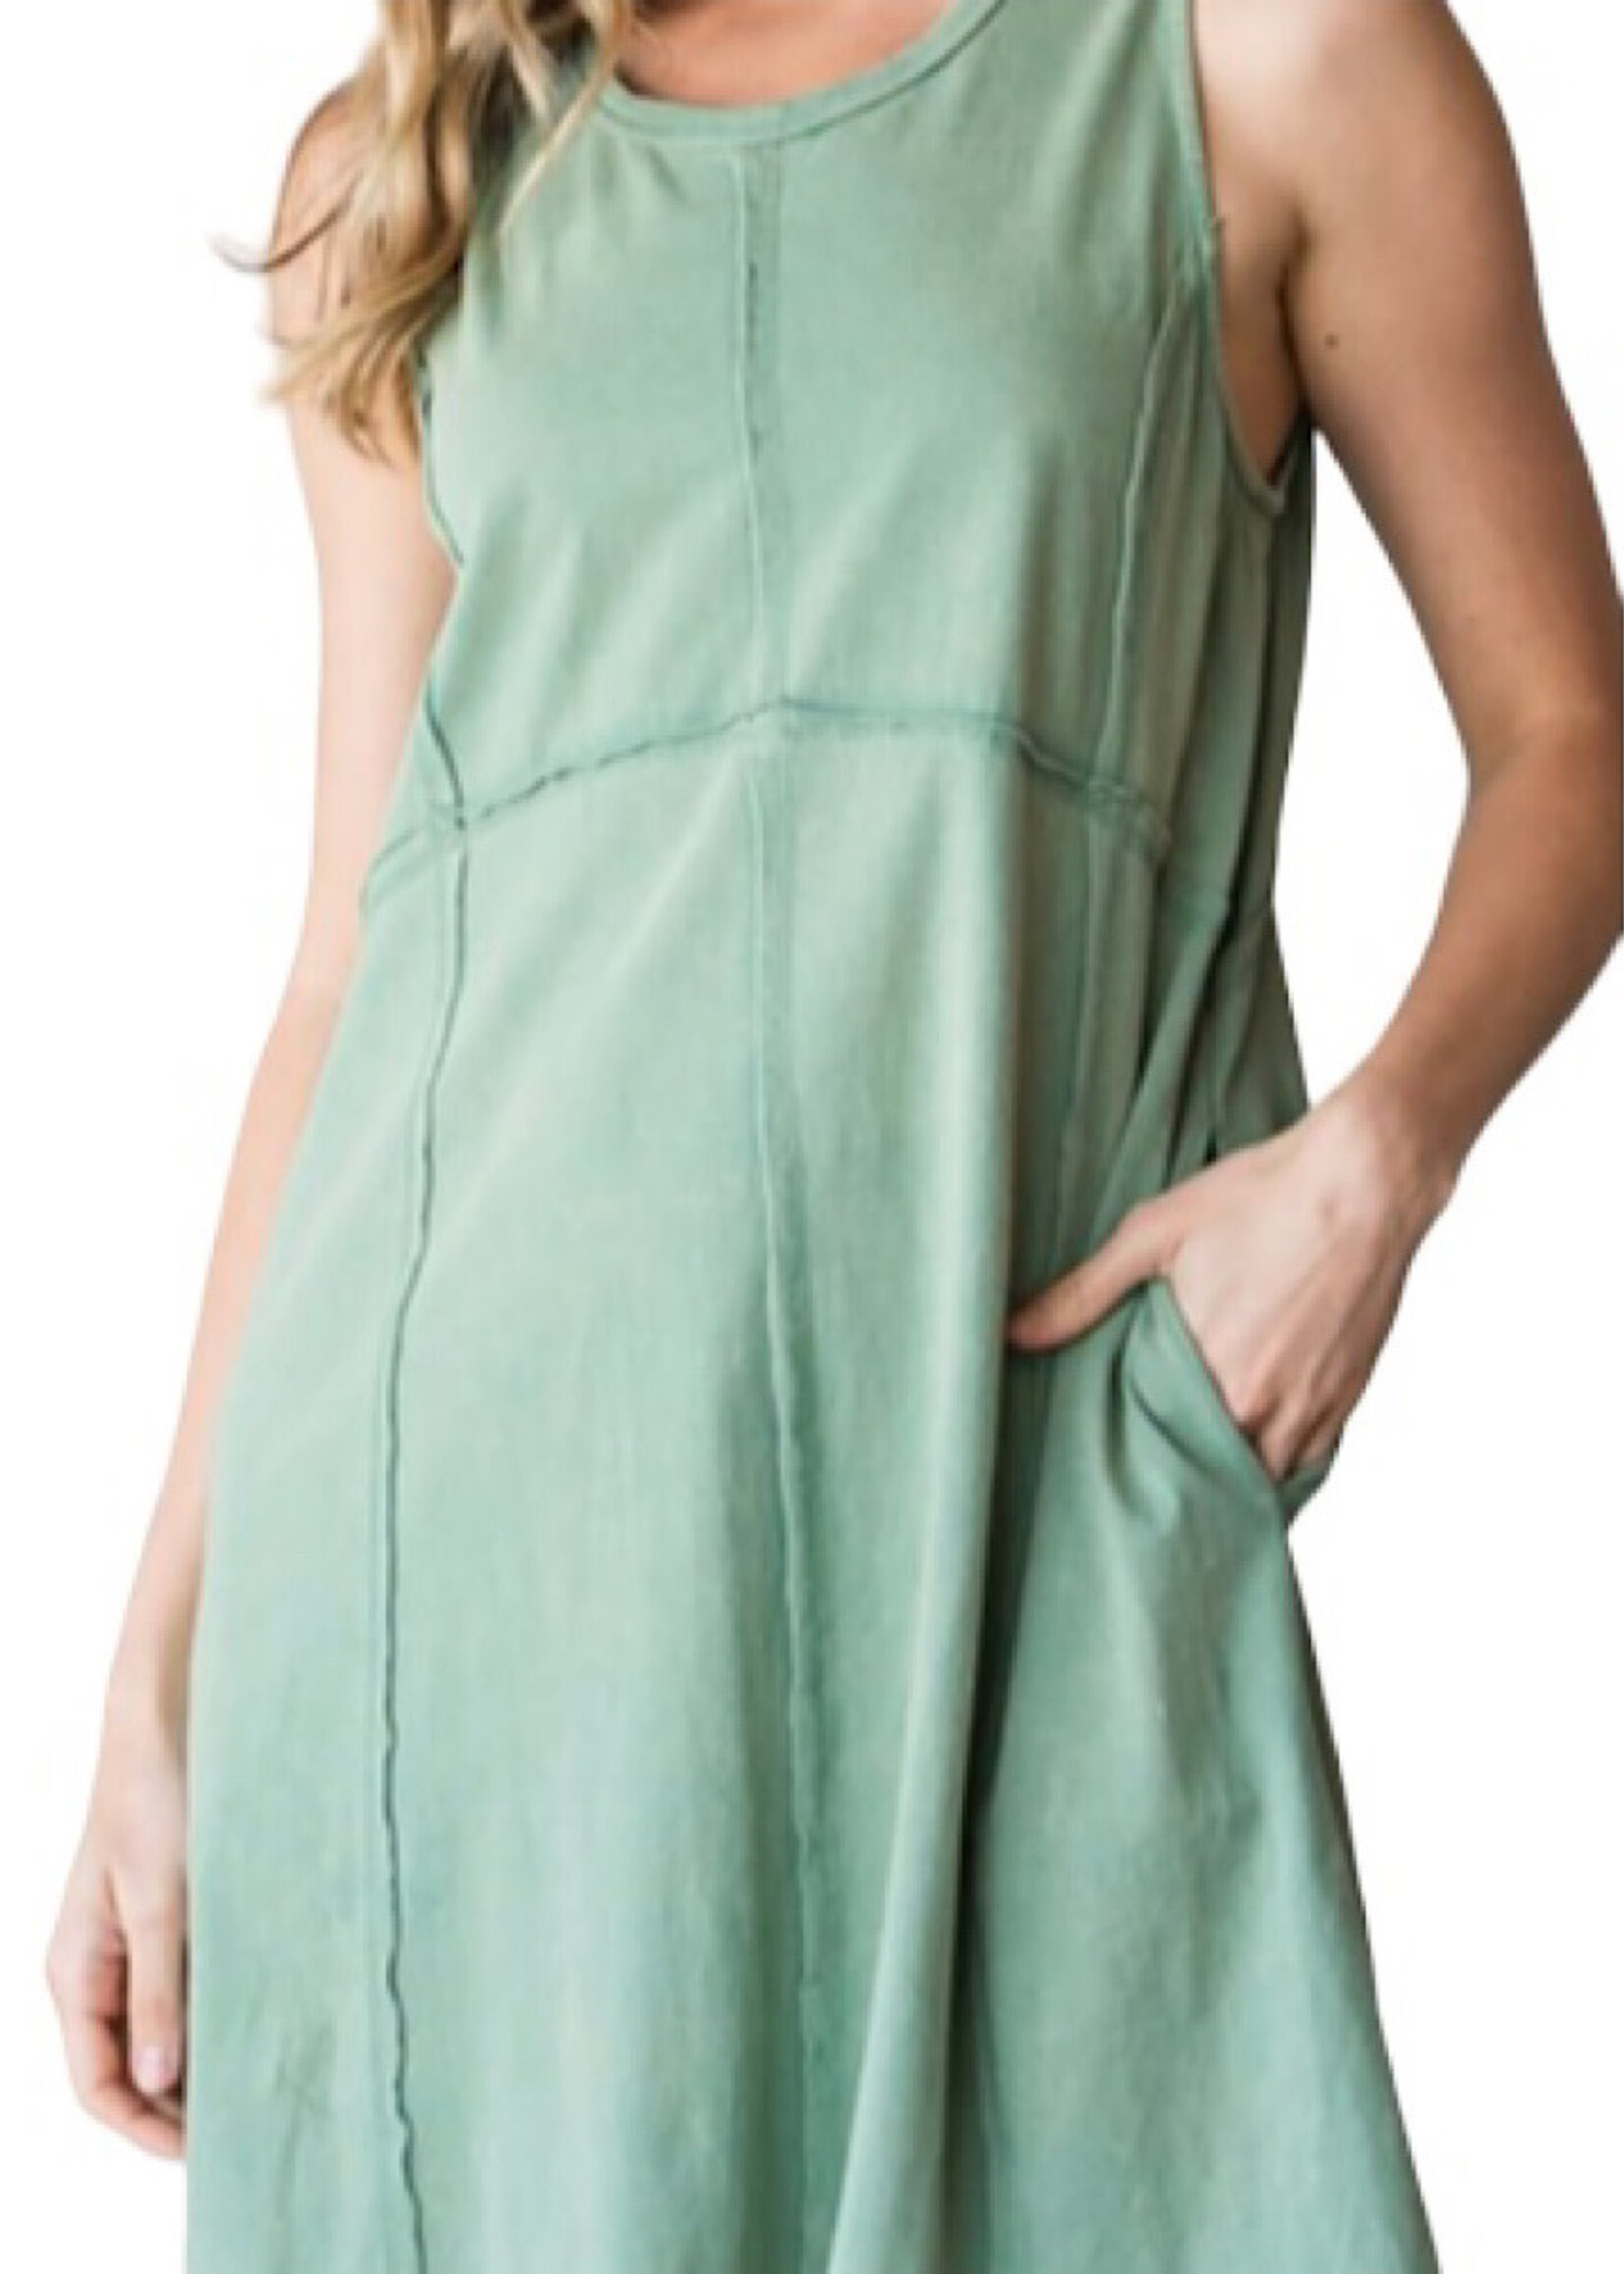 Green Tea Washed Tank Dress with Stitching